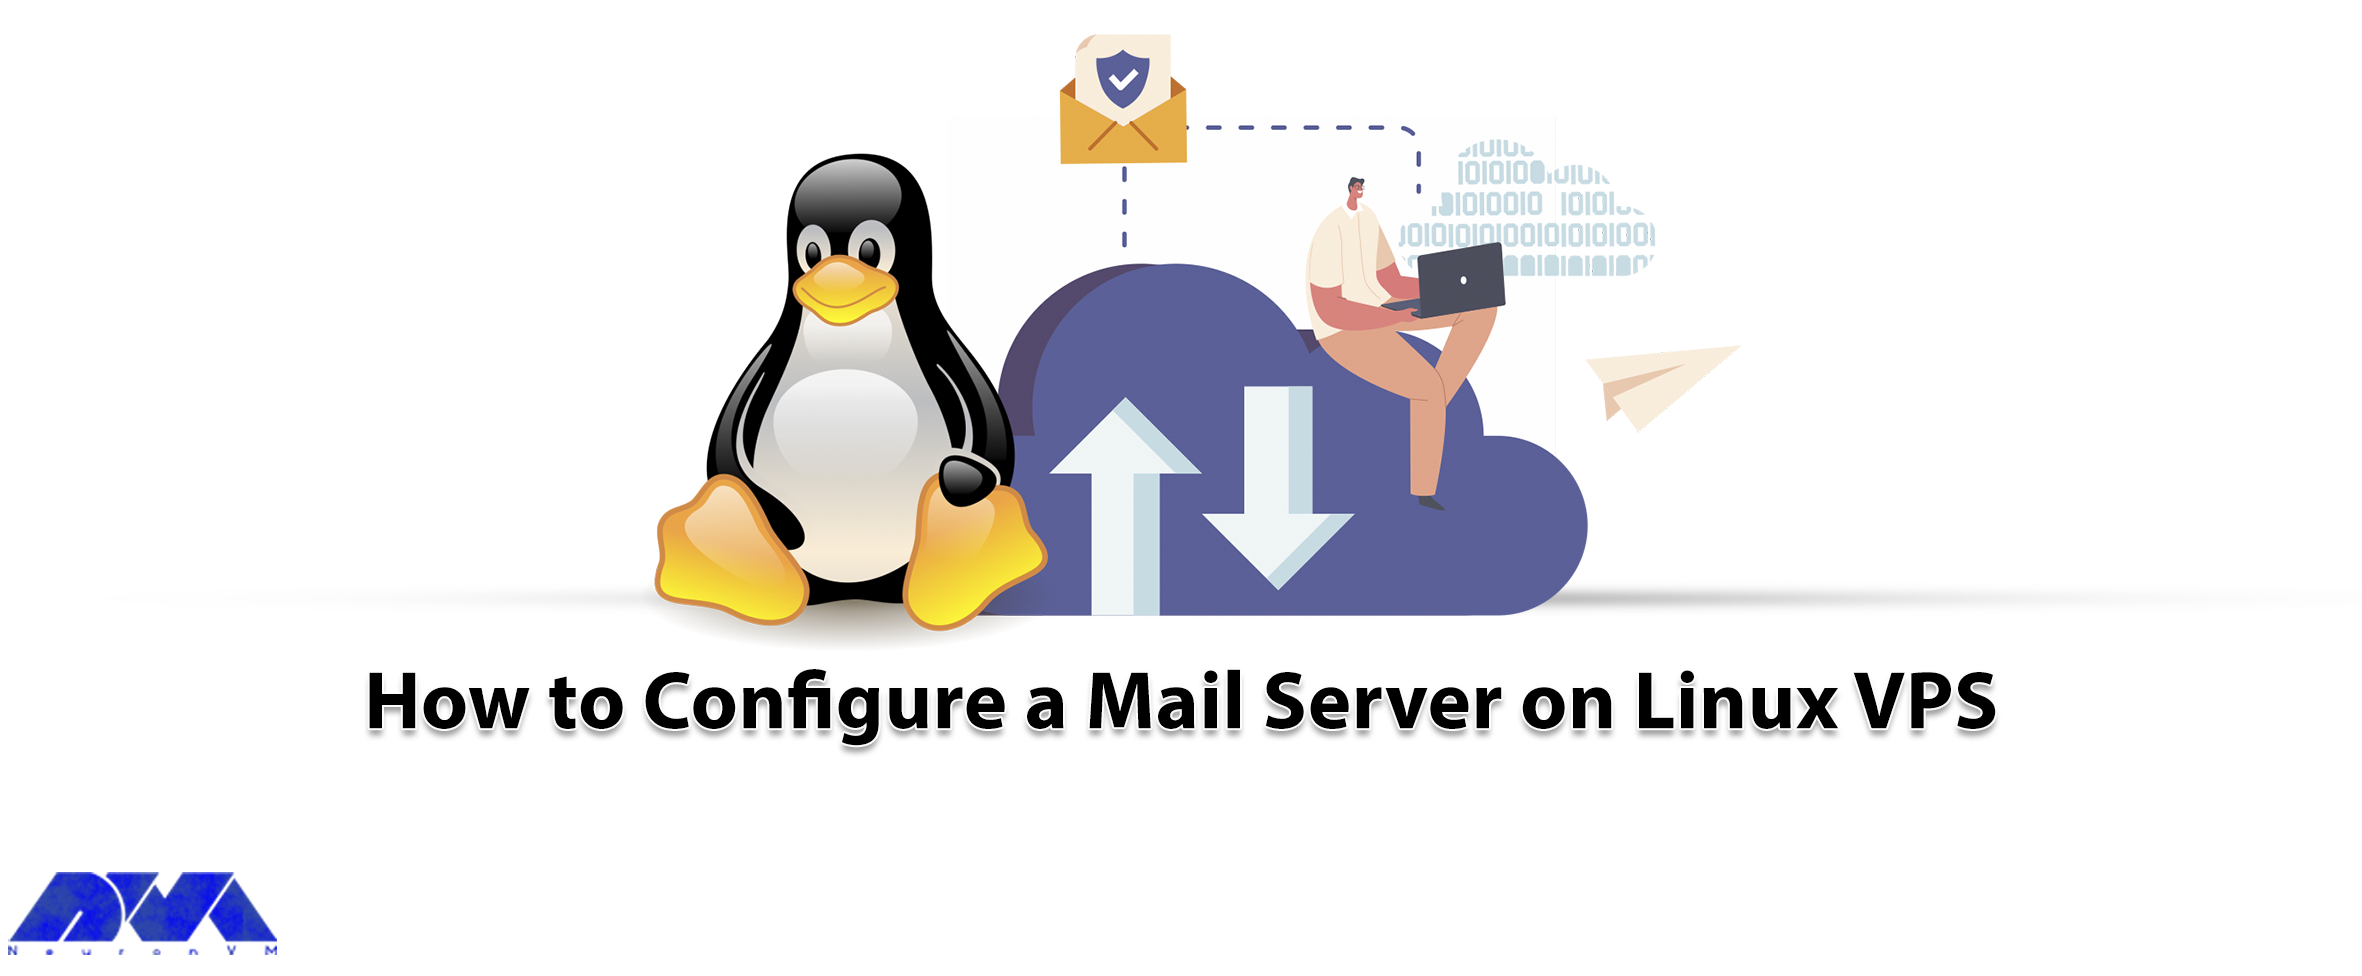 How to Configure a Mail Server on Linux VPS